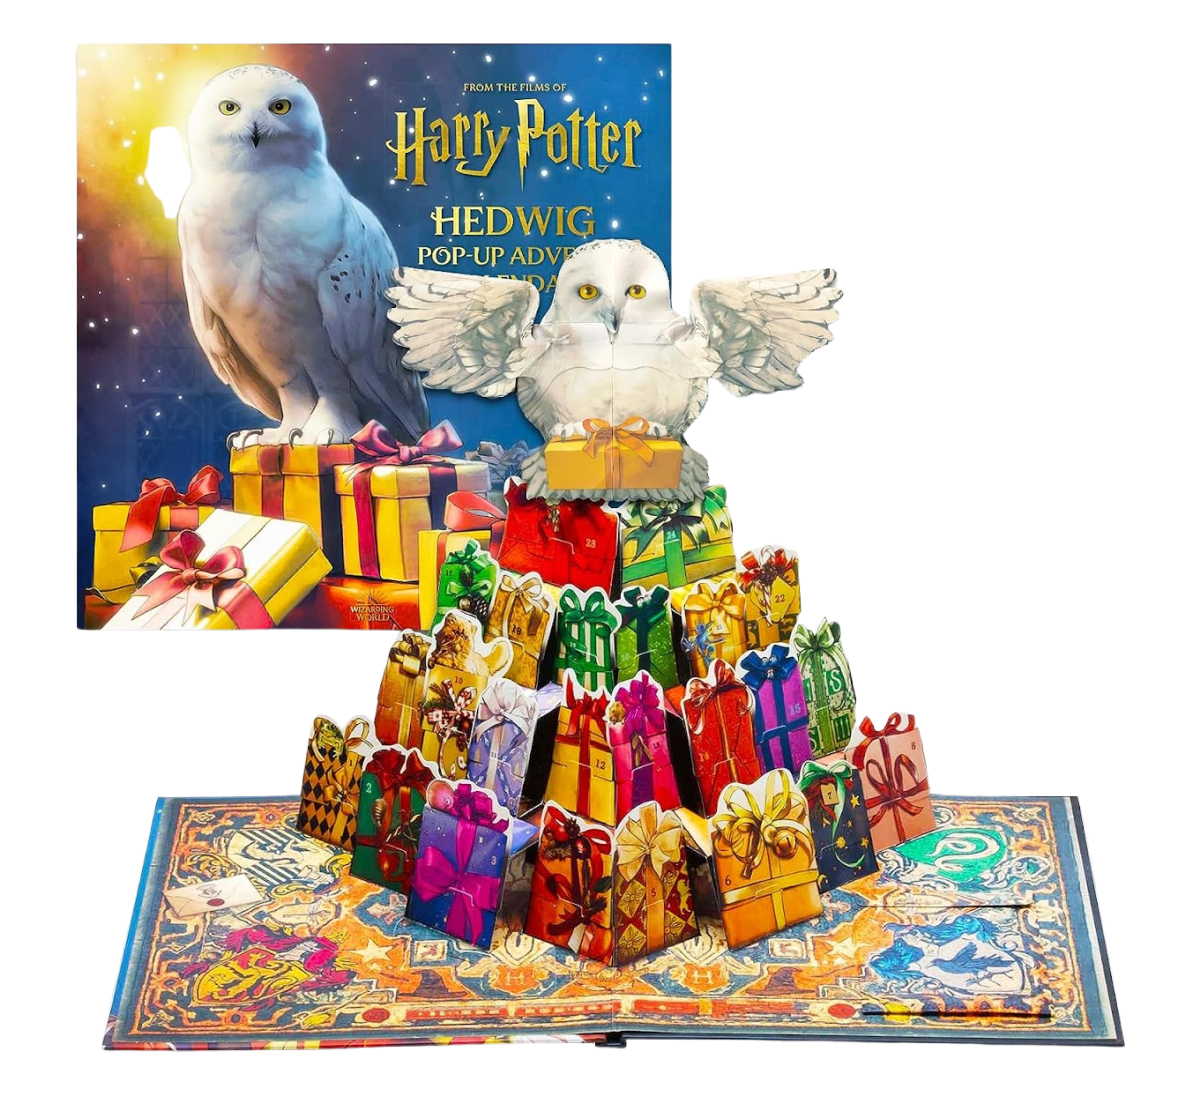 One of the best Amazon Advent calendars is this Harry Potter Countdown to Christmas calendar